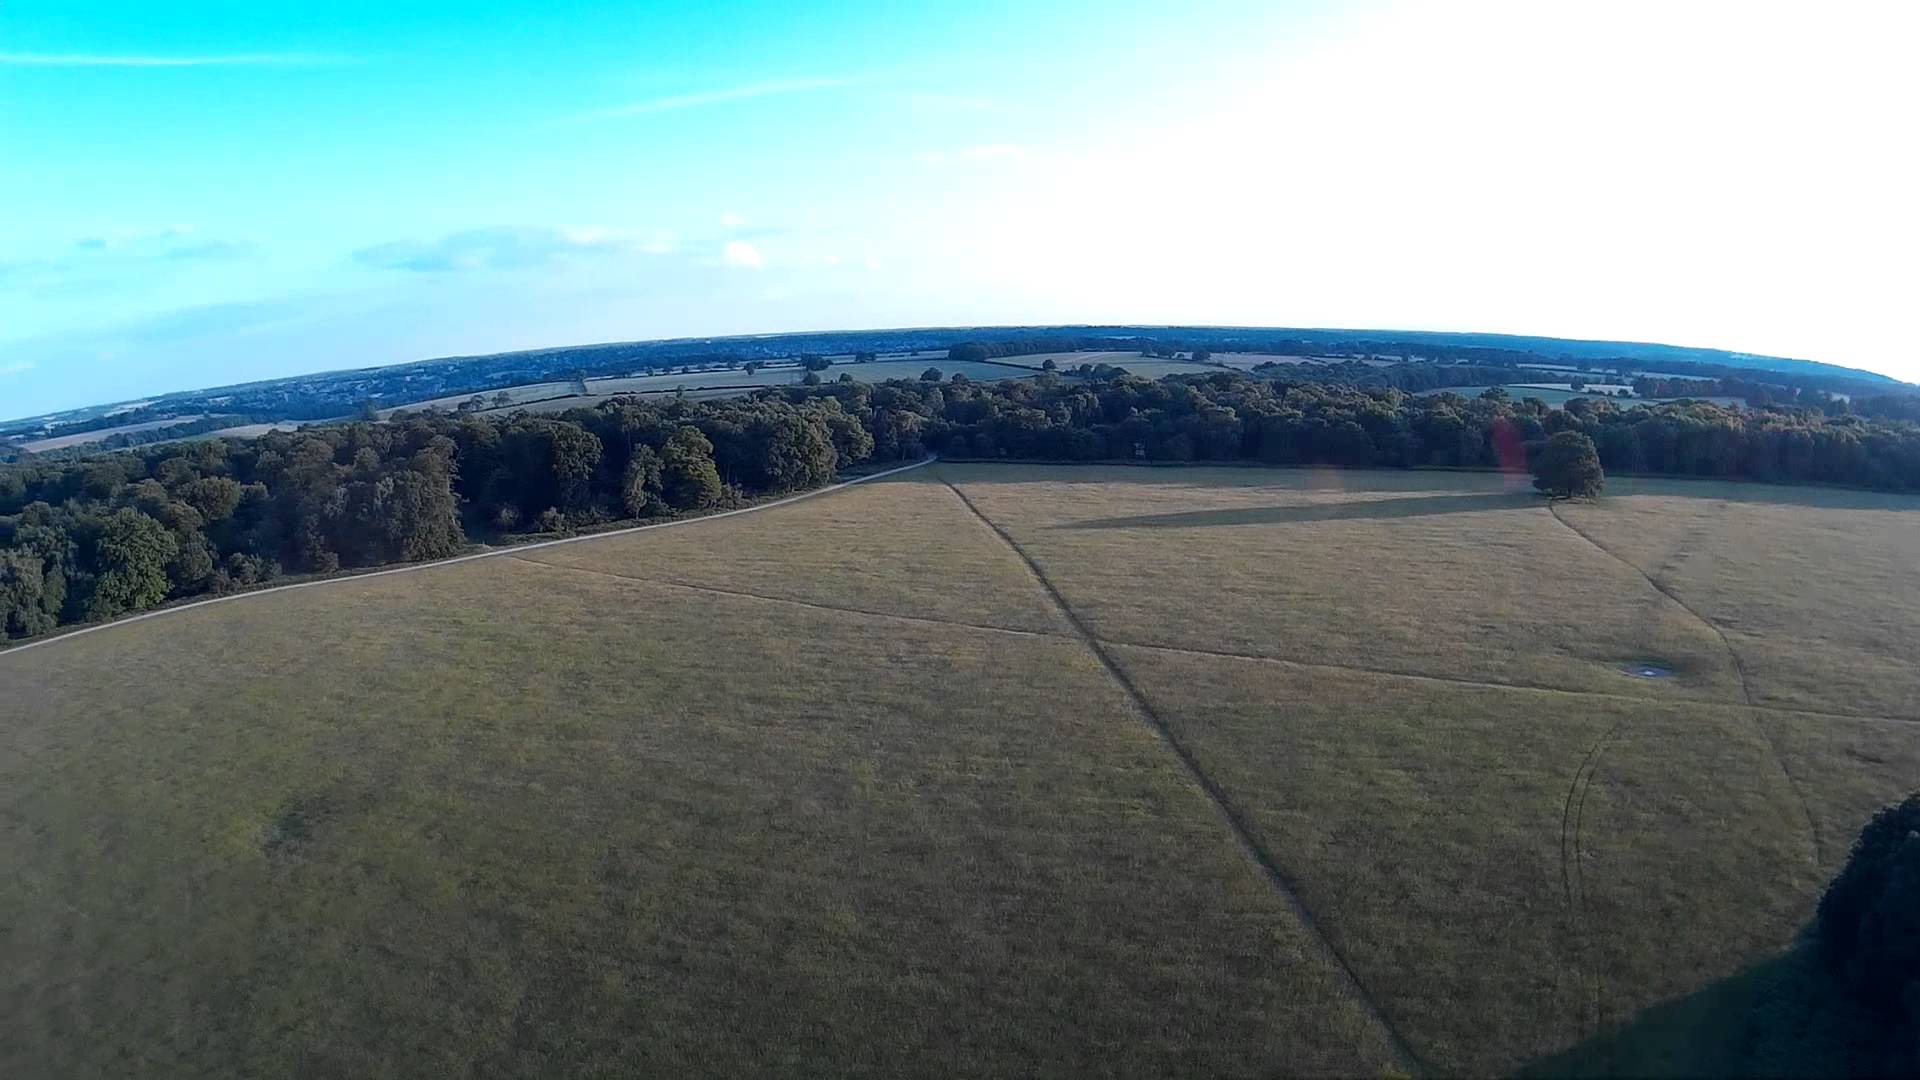 First flight of my now fully loaded quadcopter, and then …